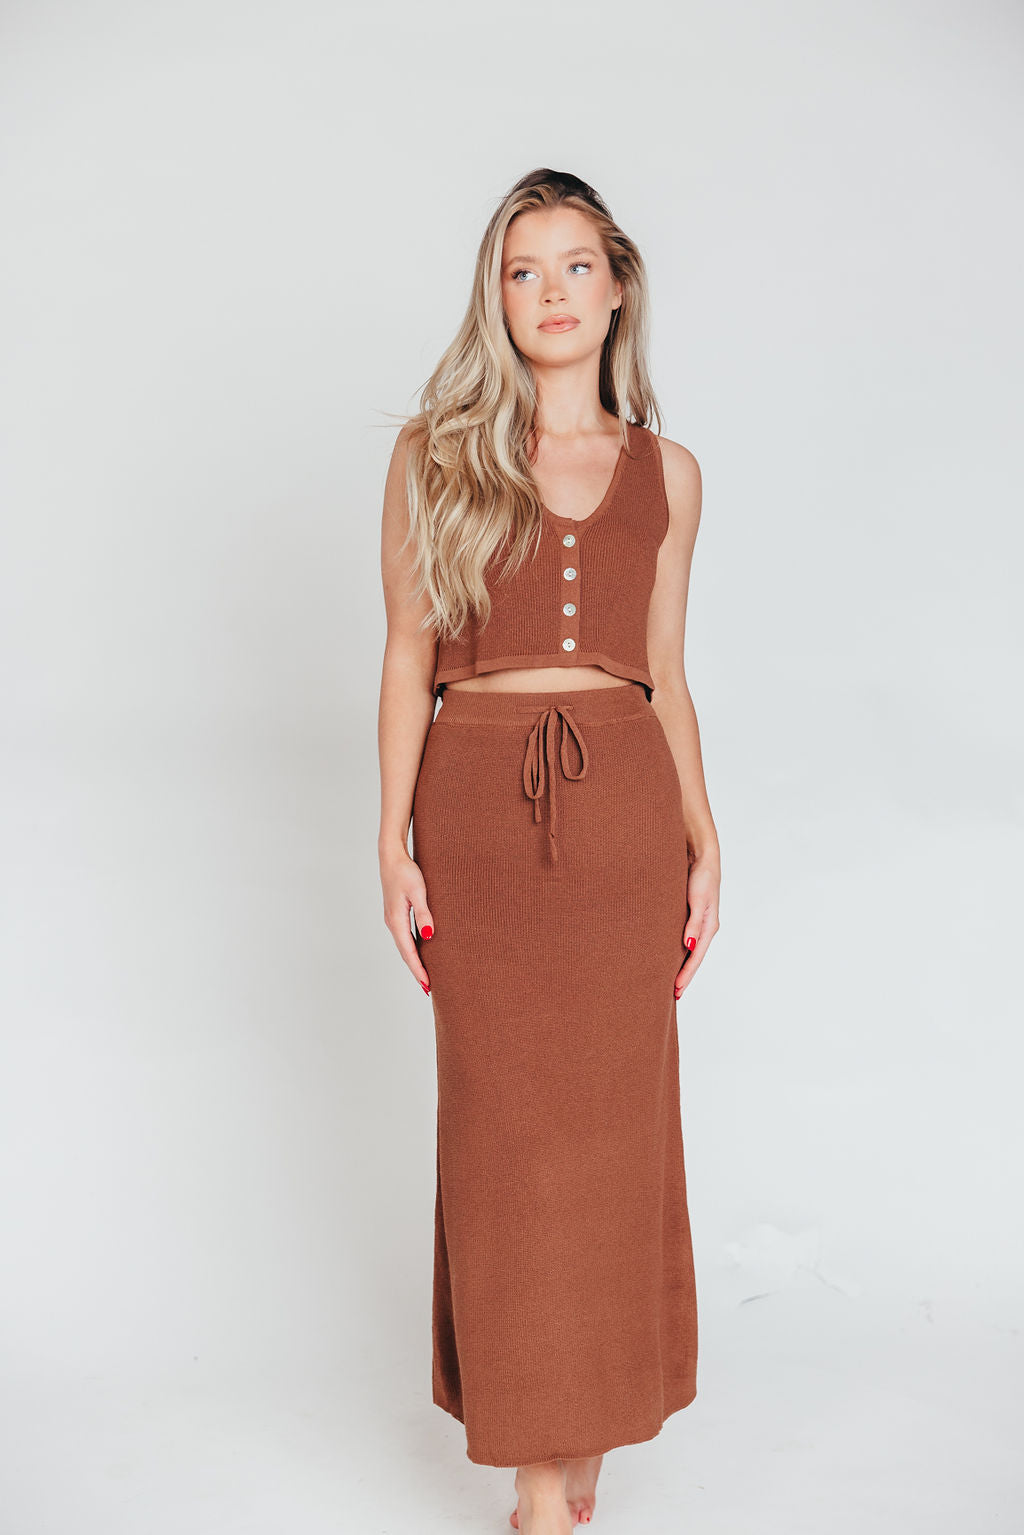 Sweet Peach Knit Vest and Maxi Skirt Set in Cocoa